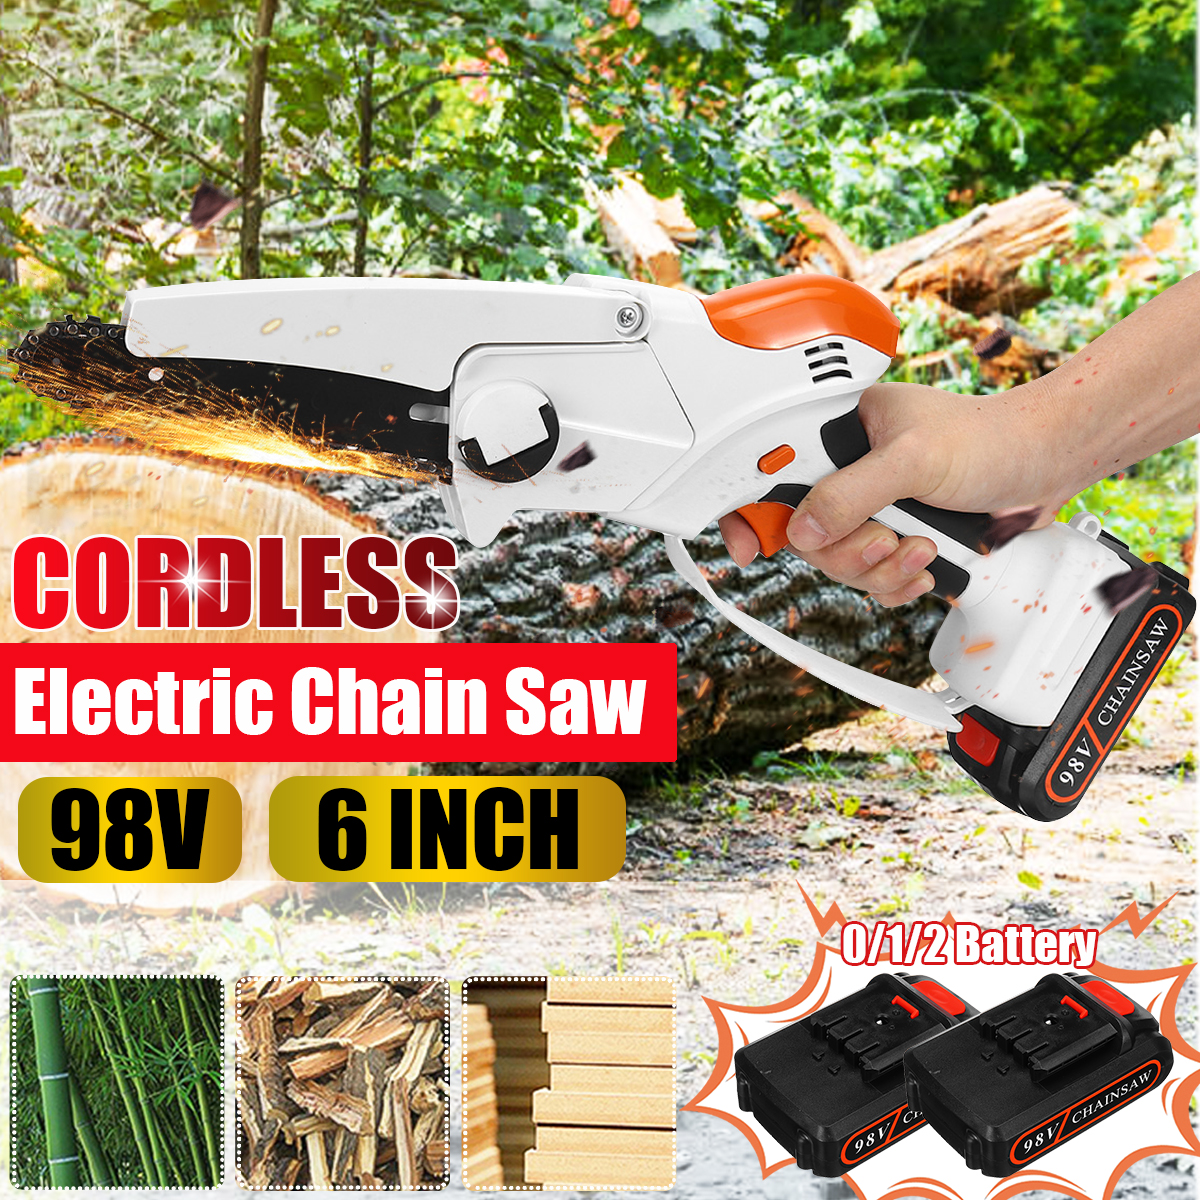 98VF-6Inch-Cordless-Electric-Chain-Saw-Rechargeable-Wood-Cutter-Woodworking-Tool-W-None-or1or2-Batte-1879171-1